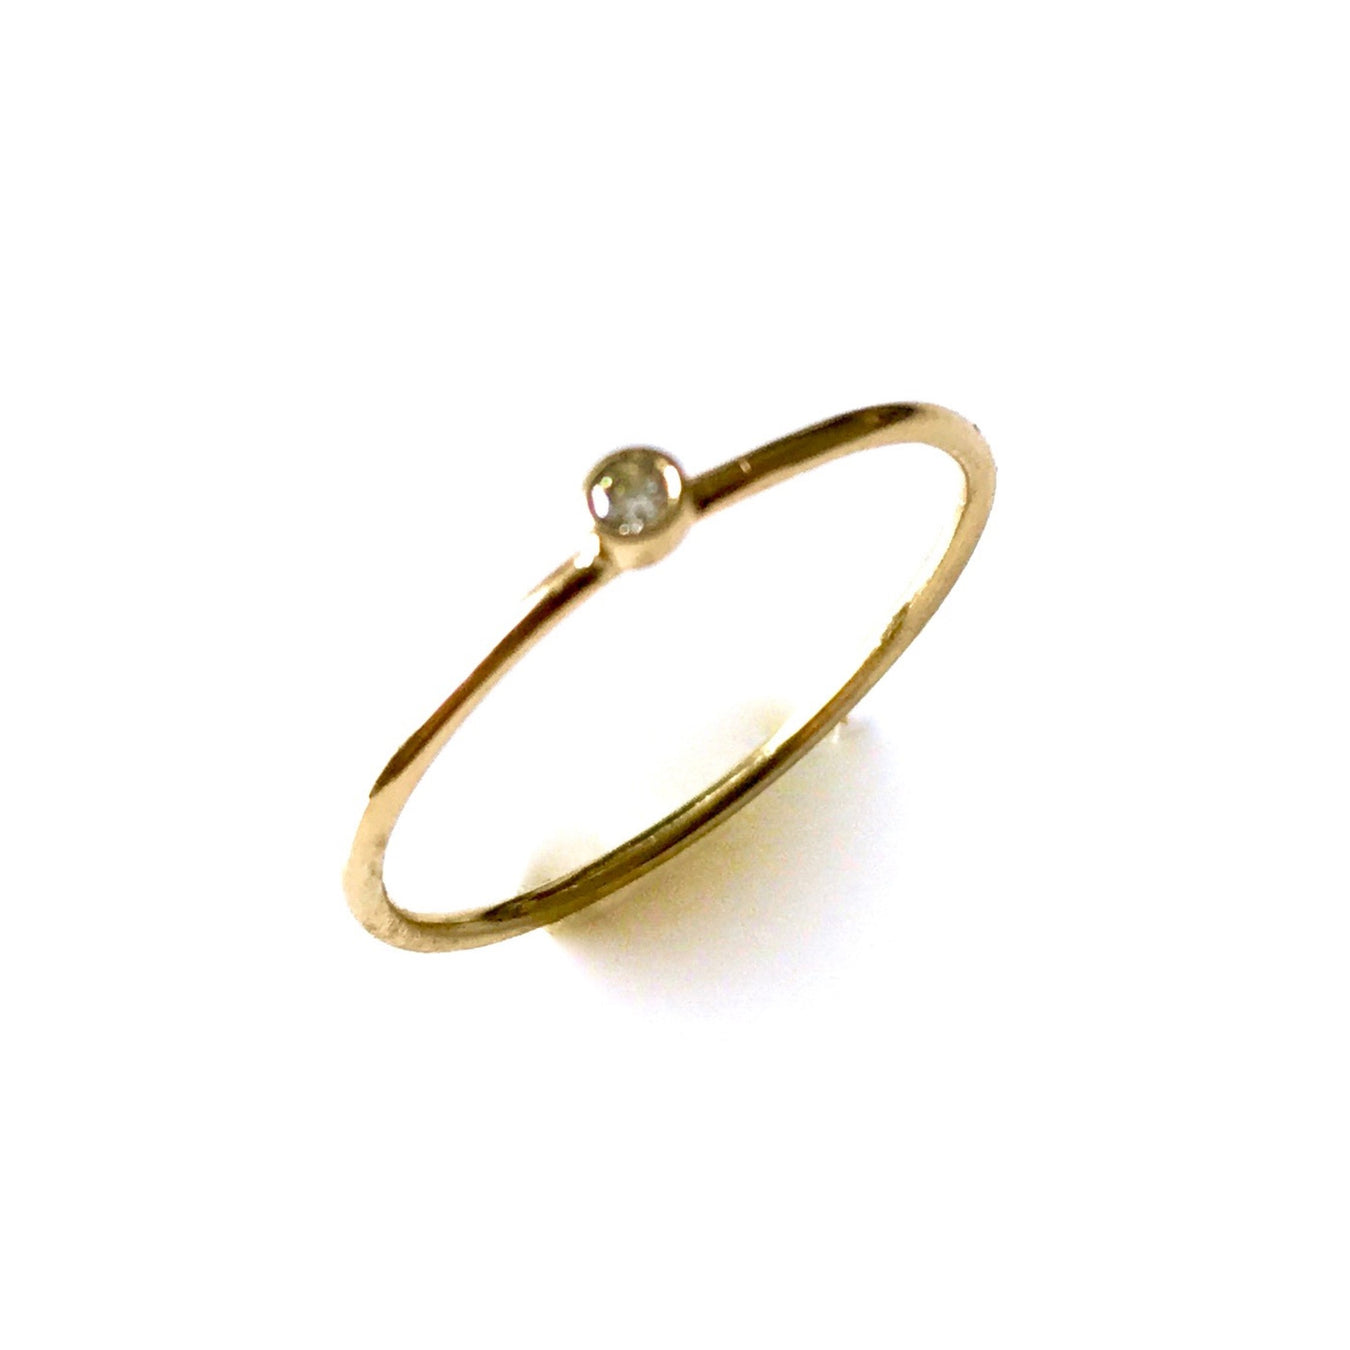 Exquisite 18ct gold ring with a stunning gemstone, perfect for engagements or special occasions